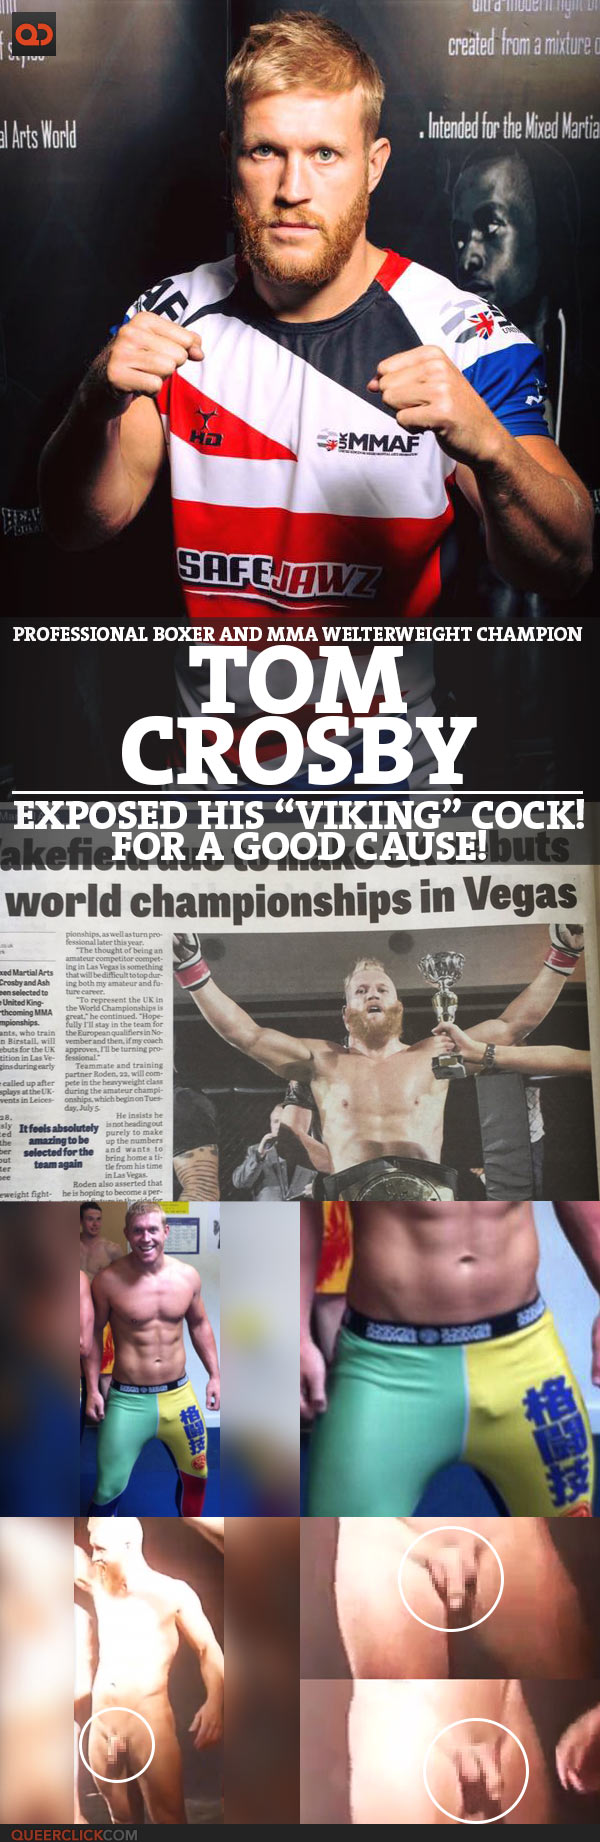 Tom Crosby,  Professional Boxer And MMA Welterweight Champion, Exposed His “Viking” Cock For A Good Cause!